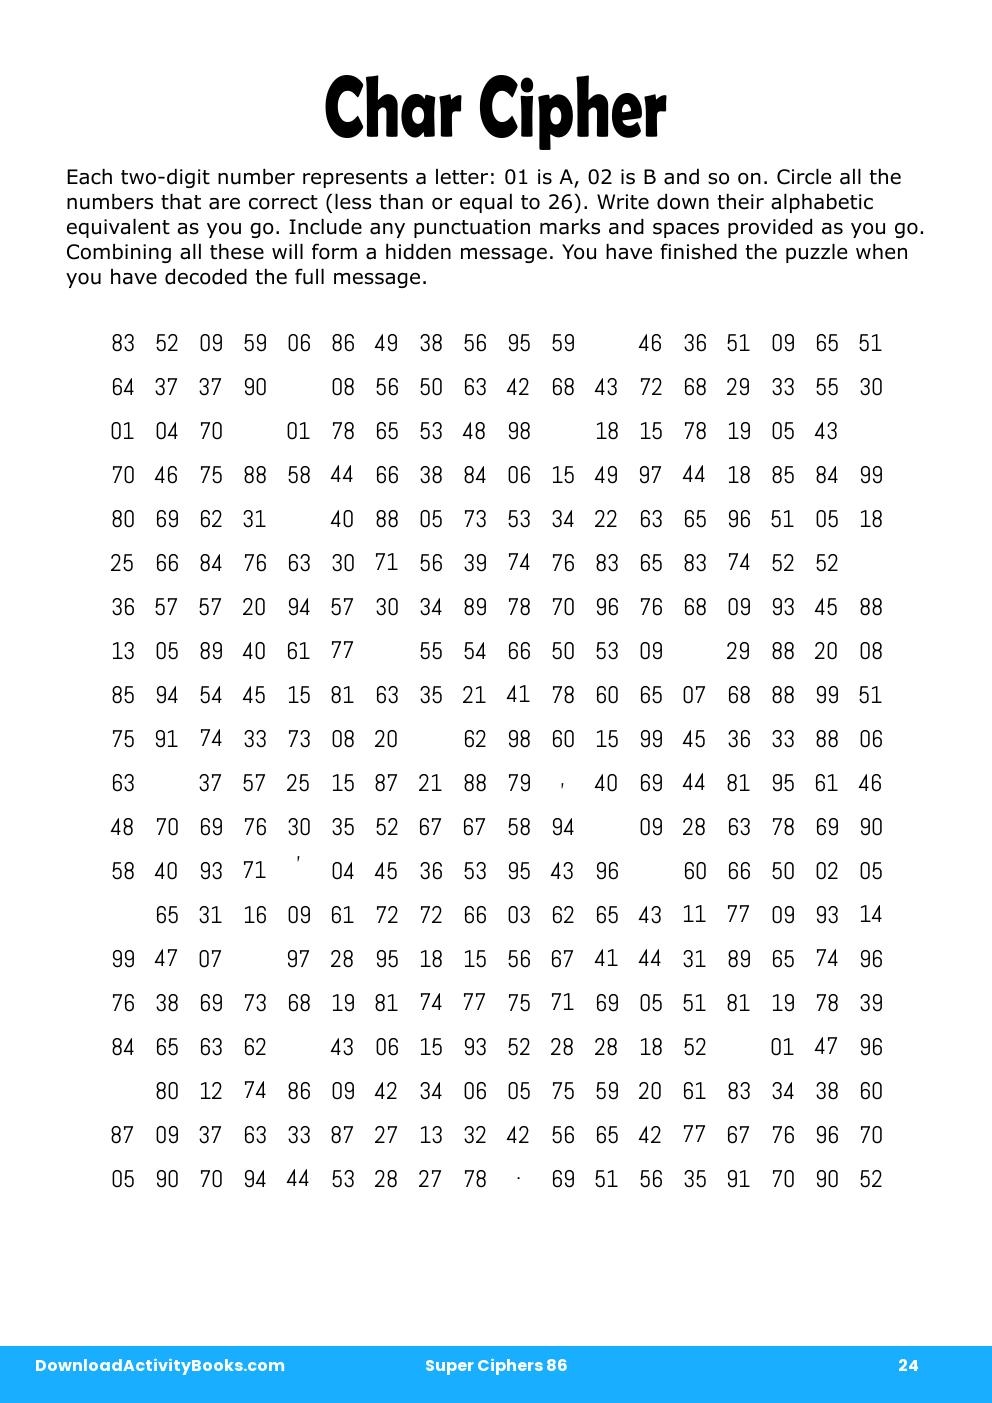 Char Cipher in Super Ciphers 86